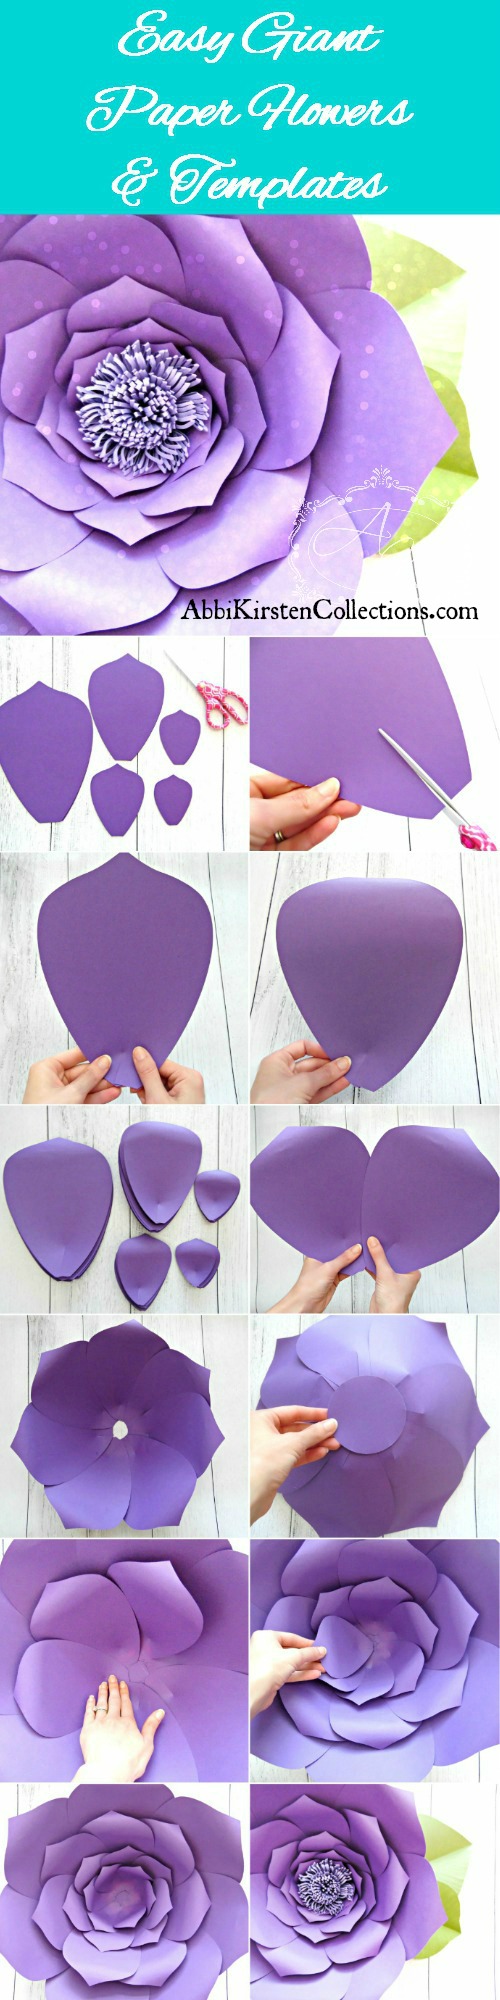 Easy giant paper flower tutorial. Free giant paper flower template by Abbi Kirsten Collections. 